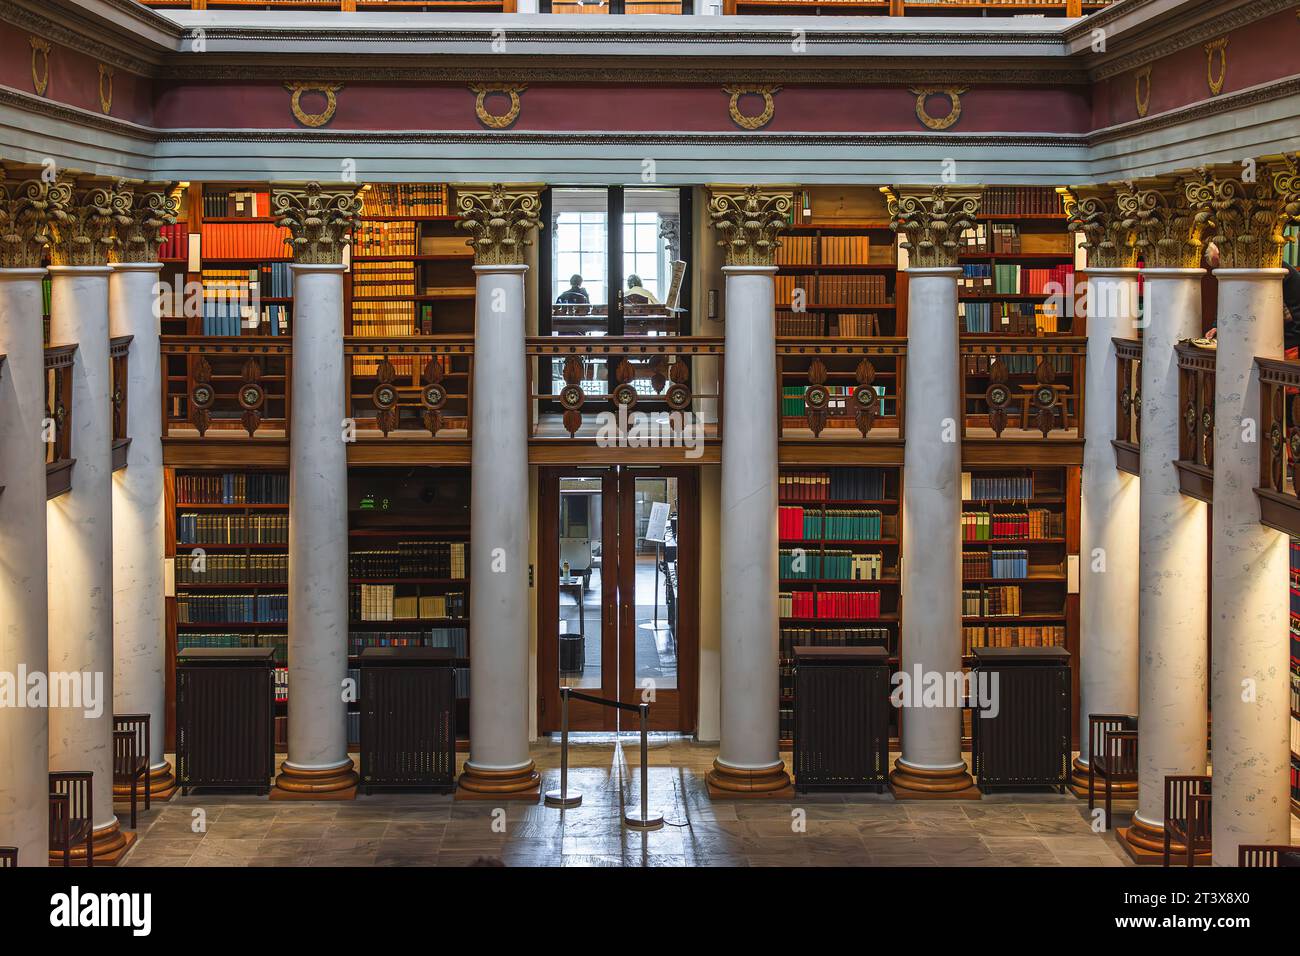 Interior view of the National Library of Finland Stock Photo